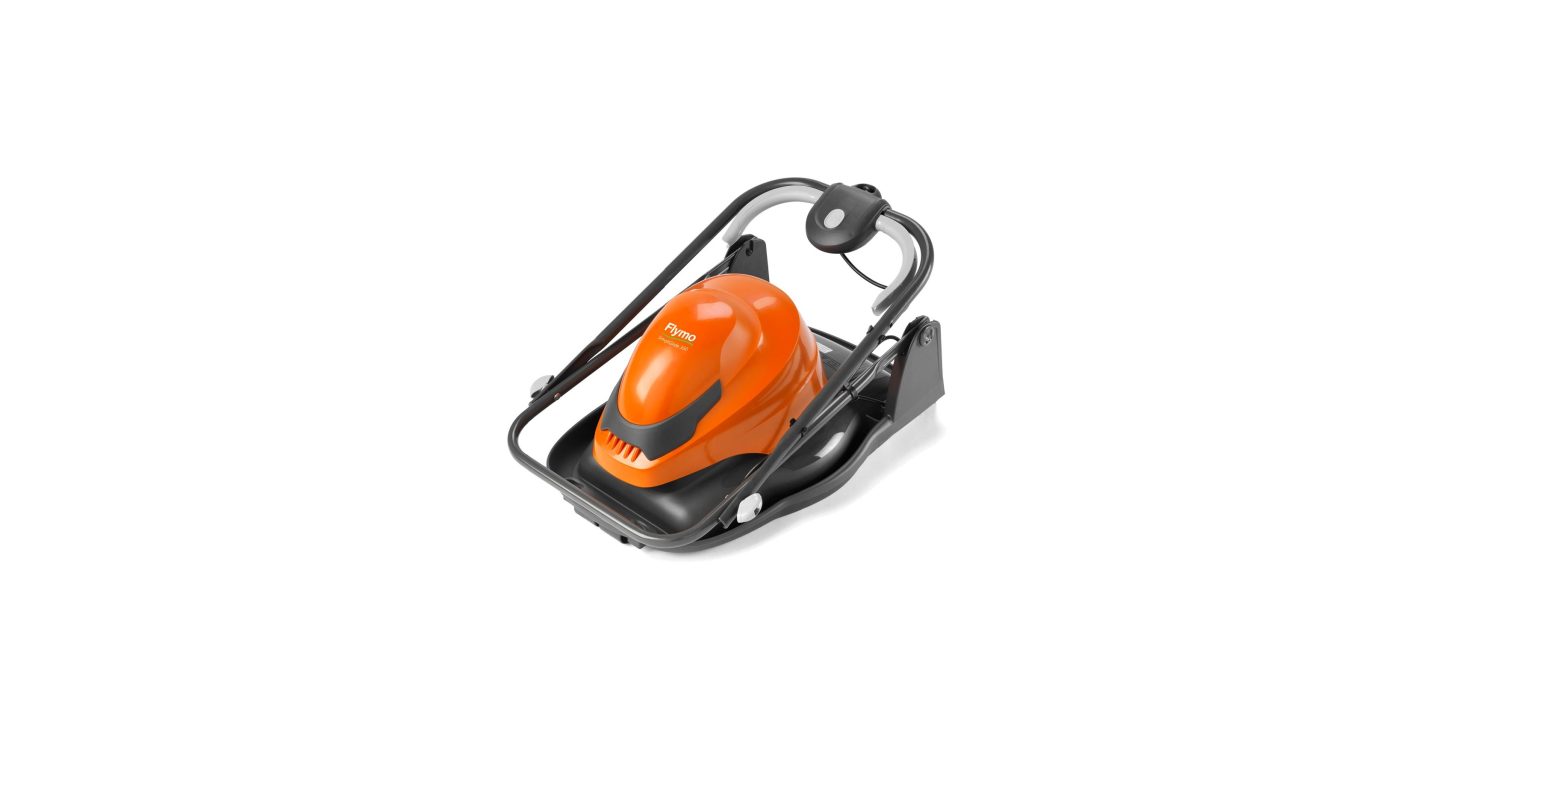 Flymo 970482501 Electric Hover Lawnmower User Manual